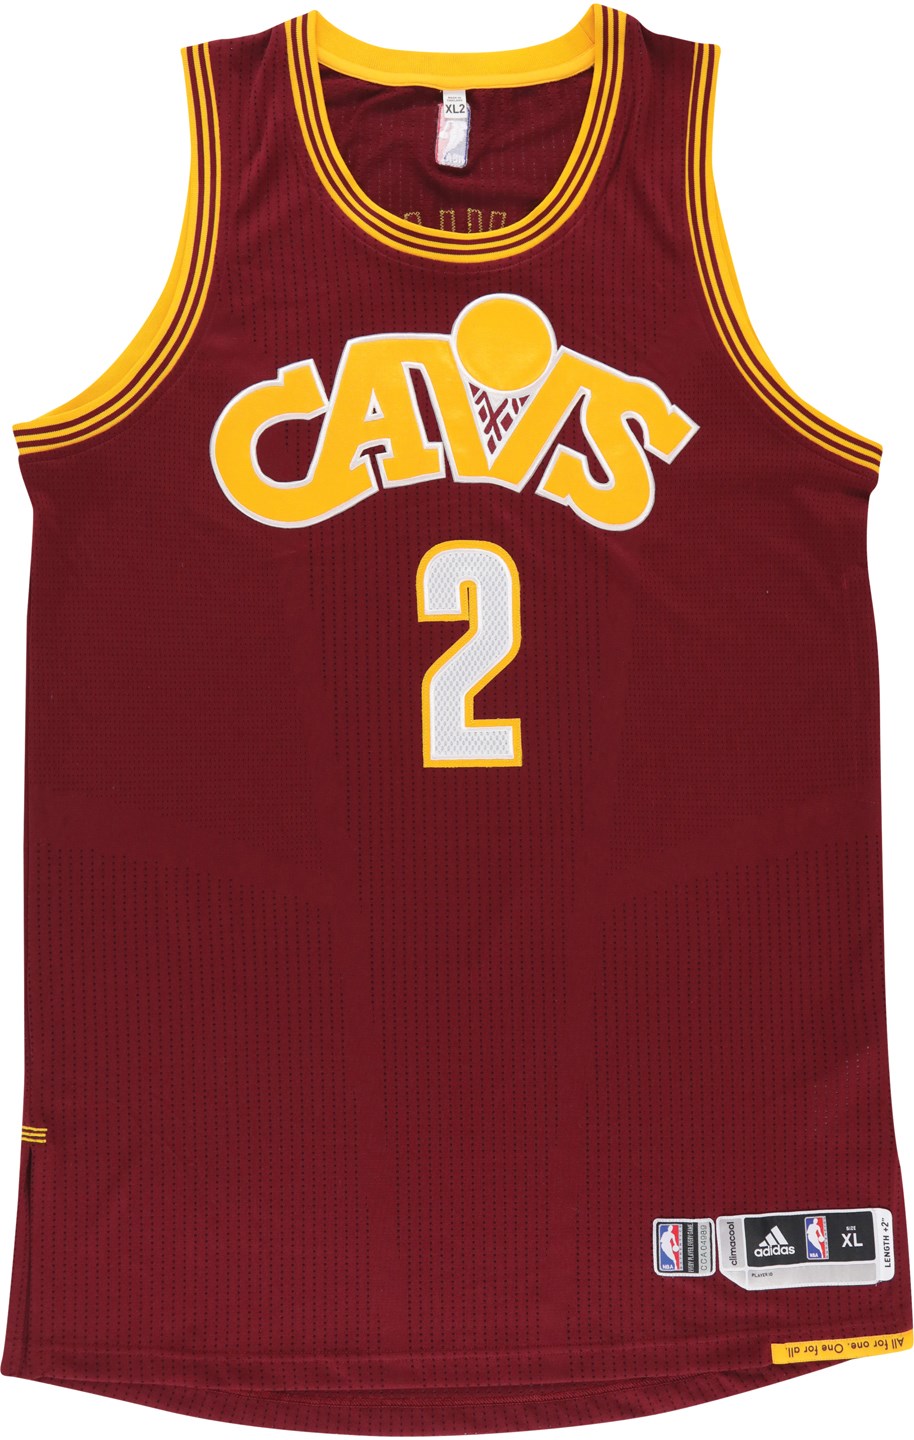 - 2016 Kyrie Irving Cleveland Cavaliers Team Issued Jersey